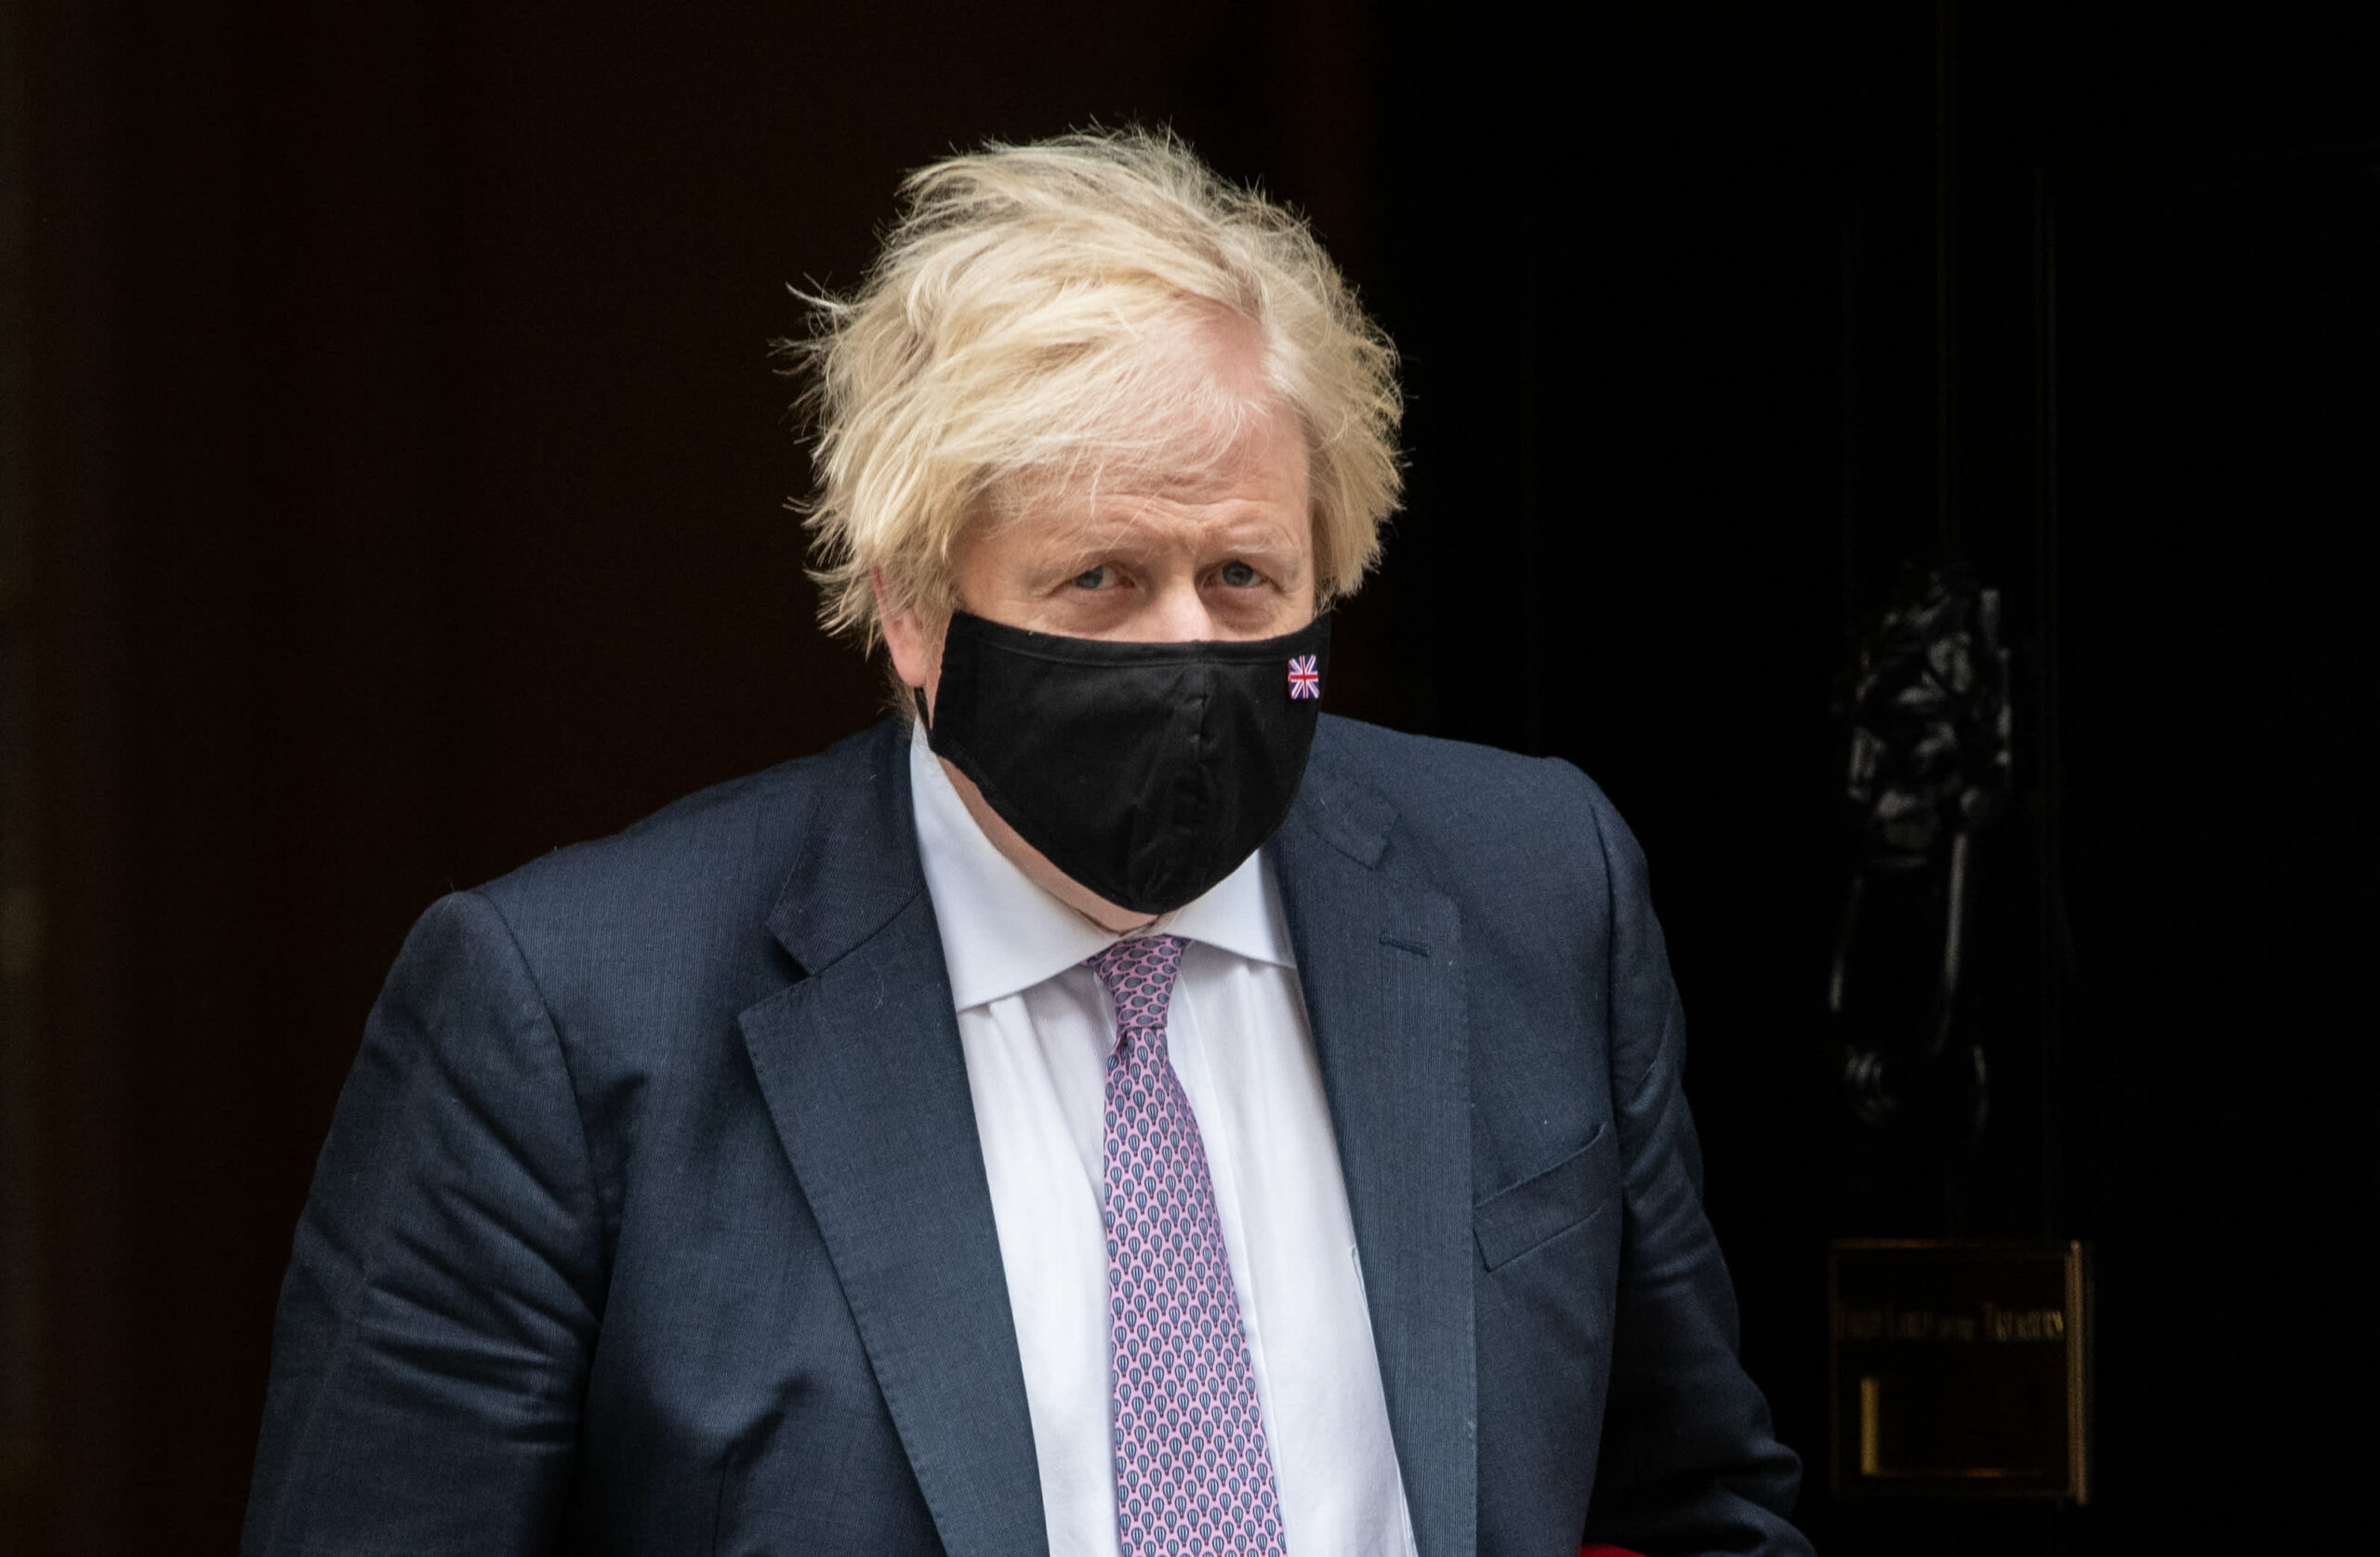 Prime Minister Boris Johnson says at least one patient has died with omicron